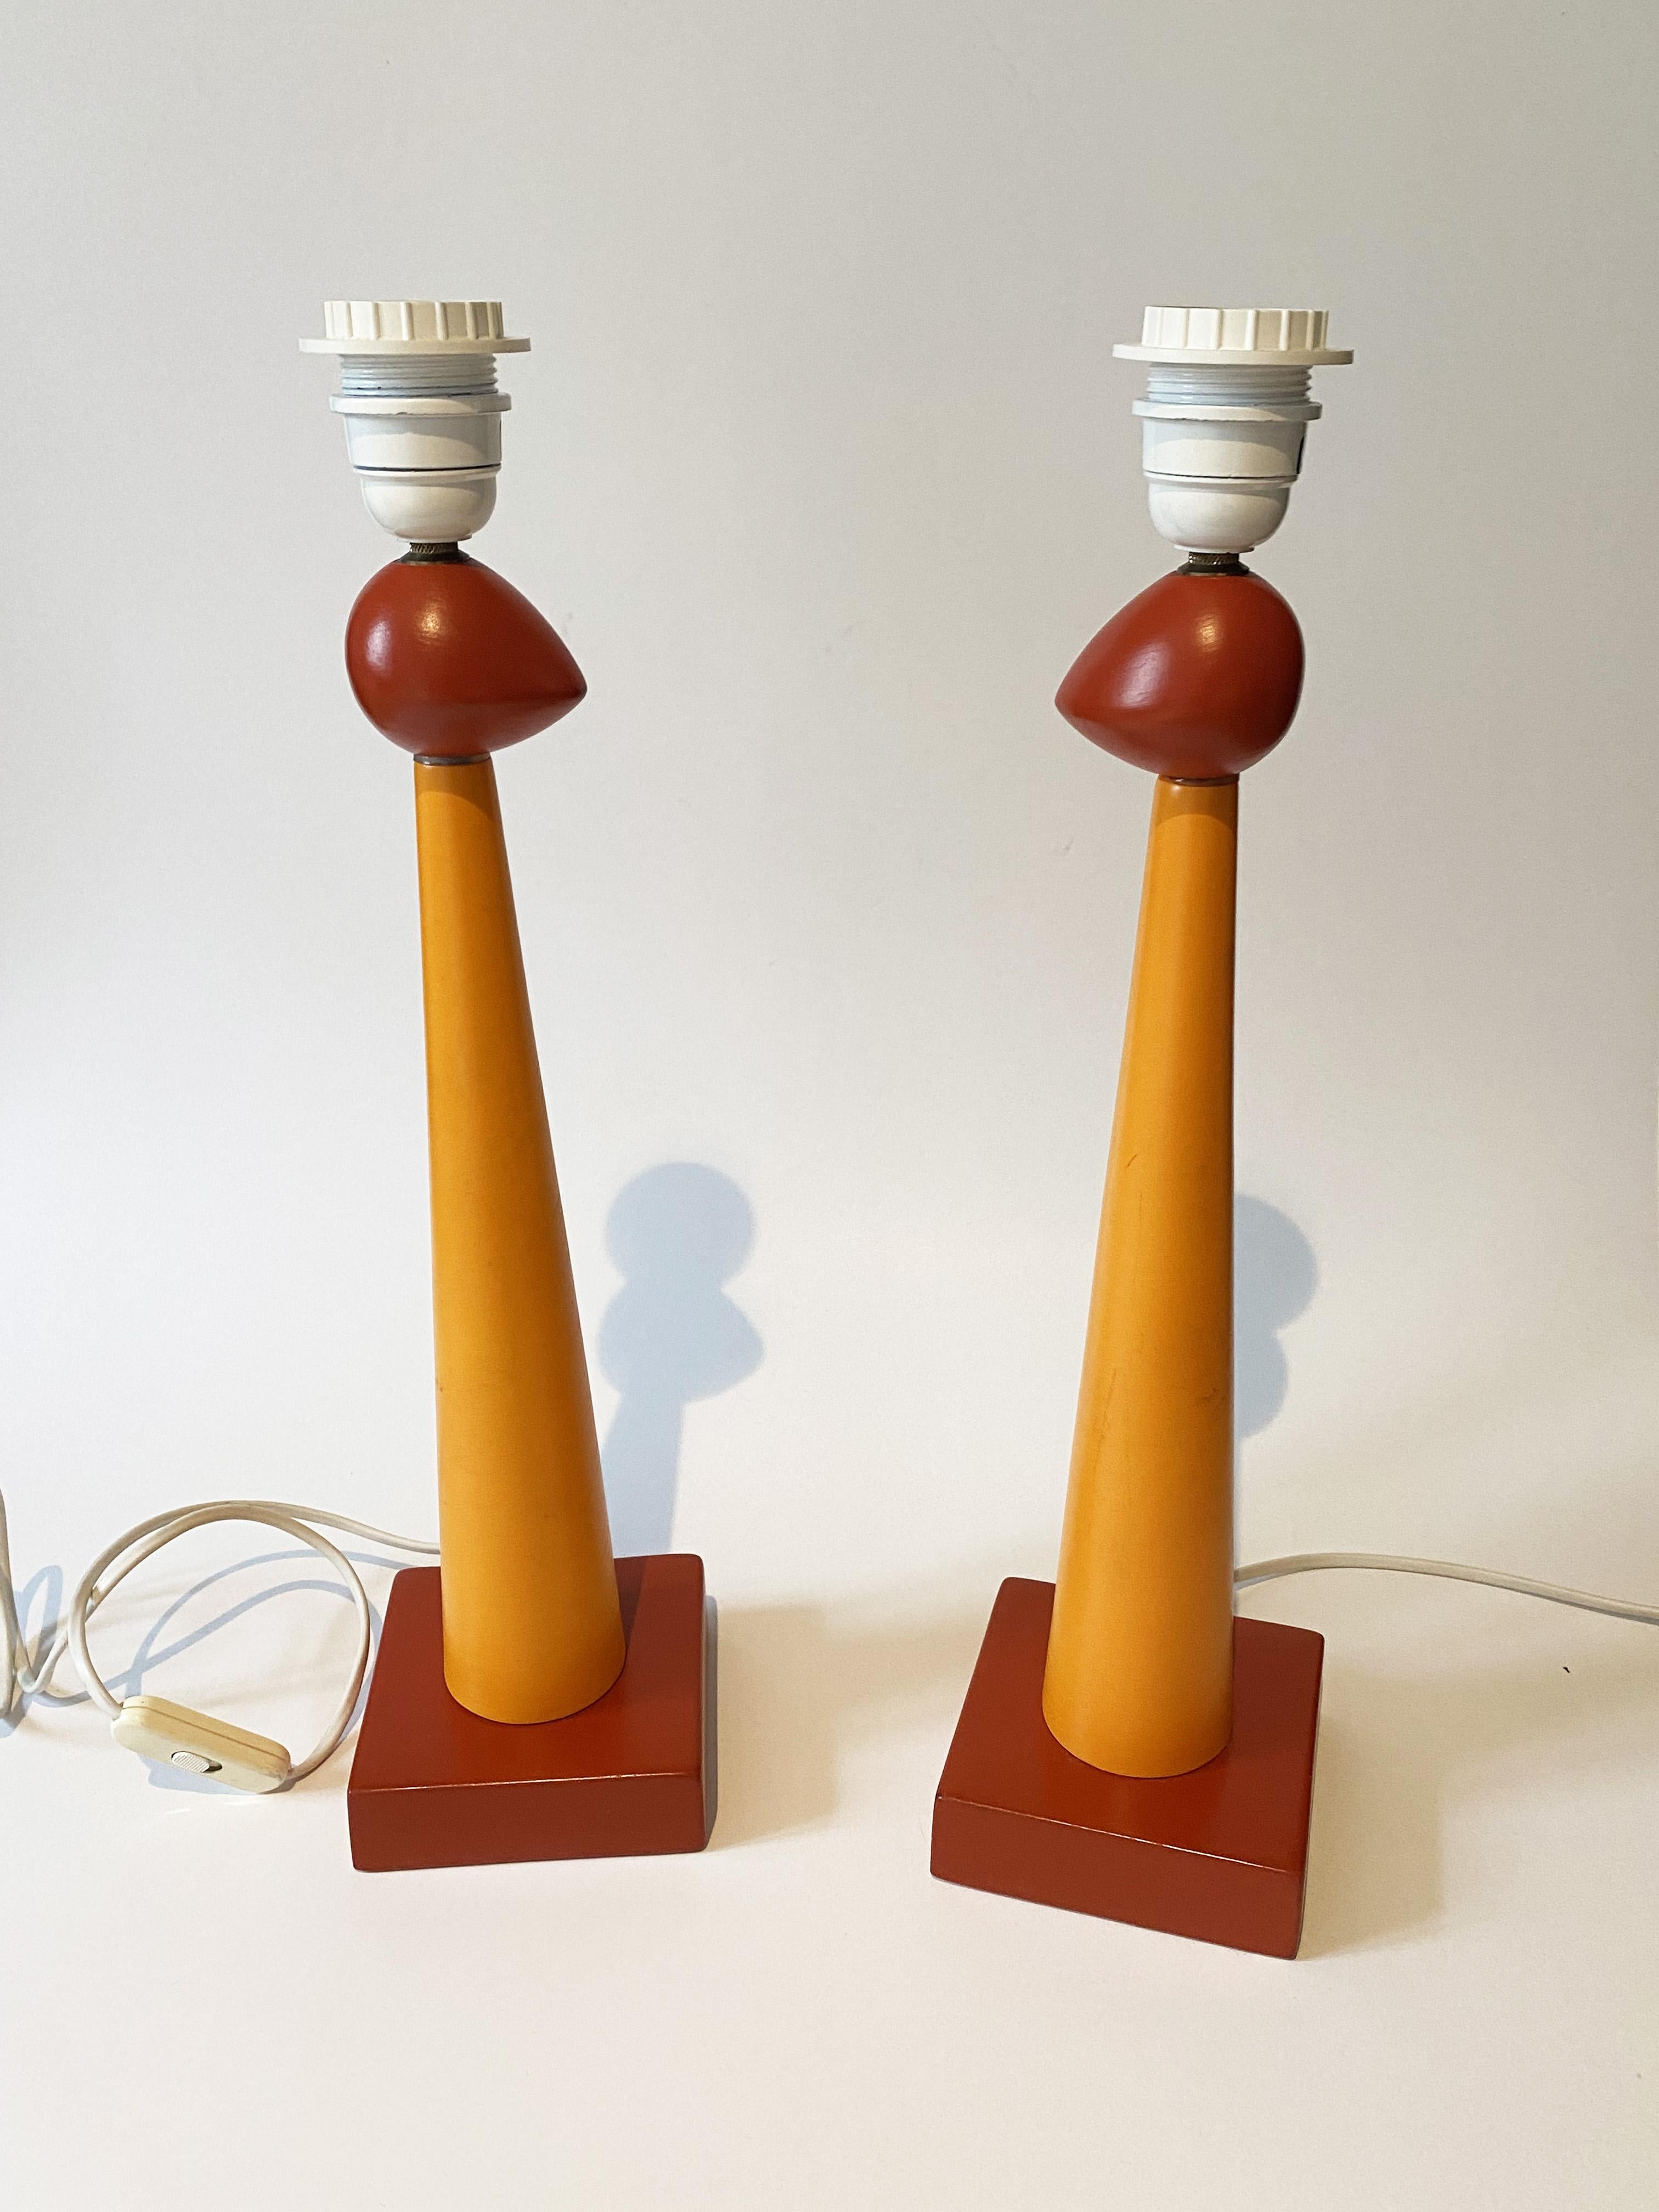 Set of 2 Postmodern Lamps in Ceramic, style of Memphis Milano or Olivier Villatte, 1980s.
Good condition, litte scratch on one of the lampshade